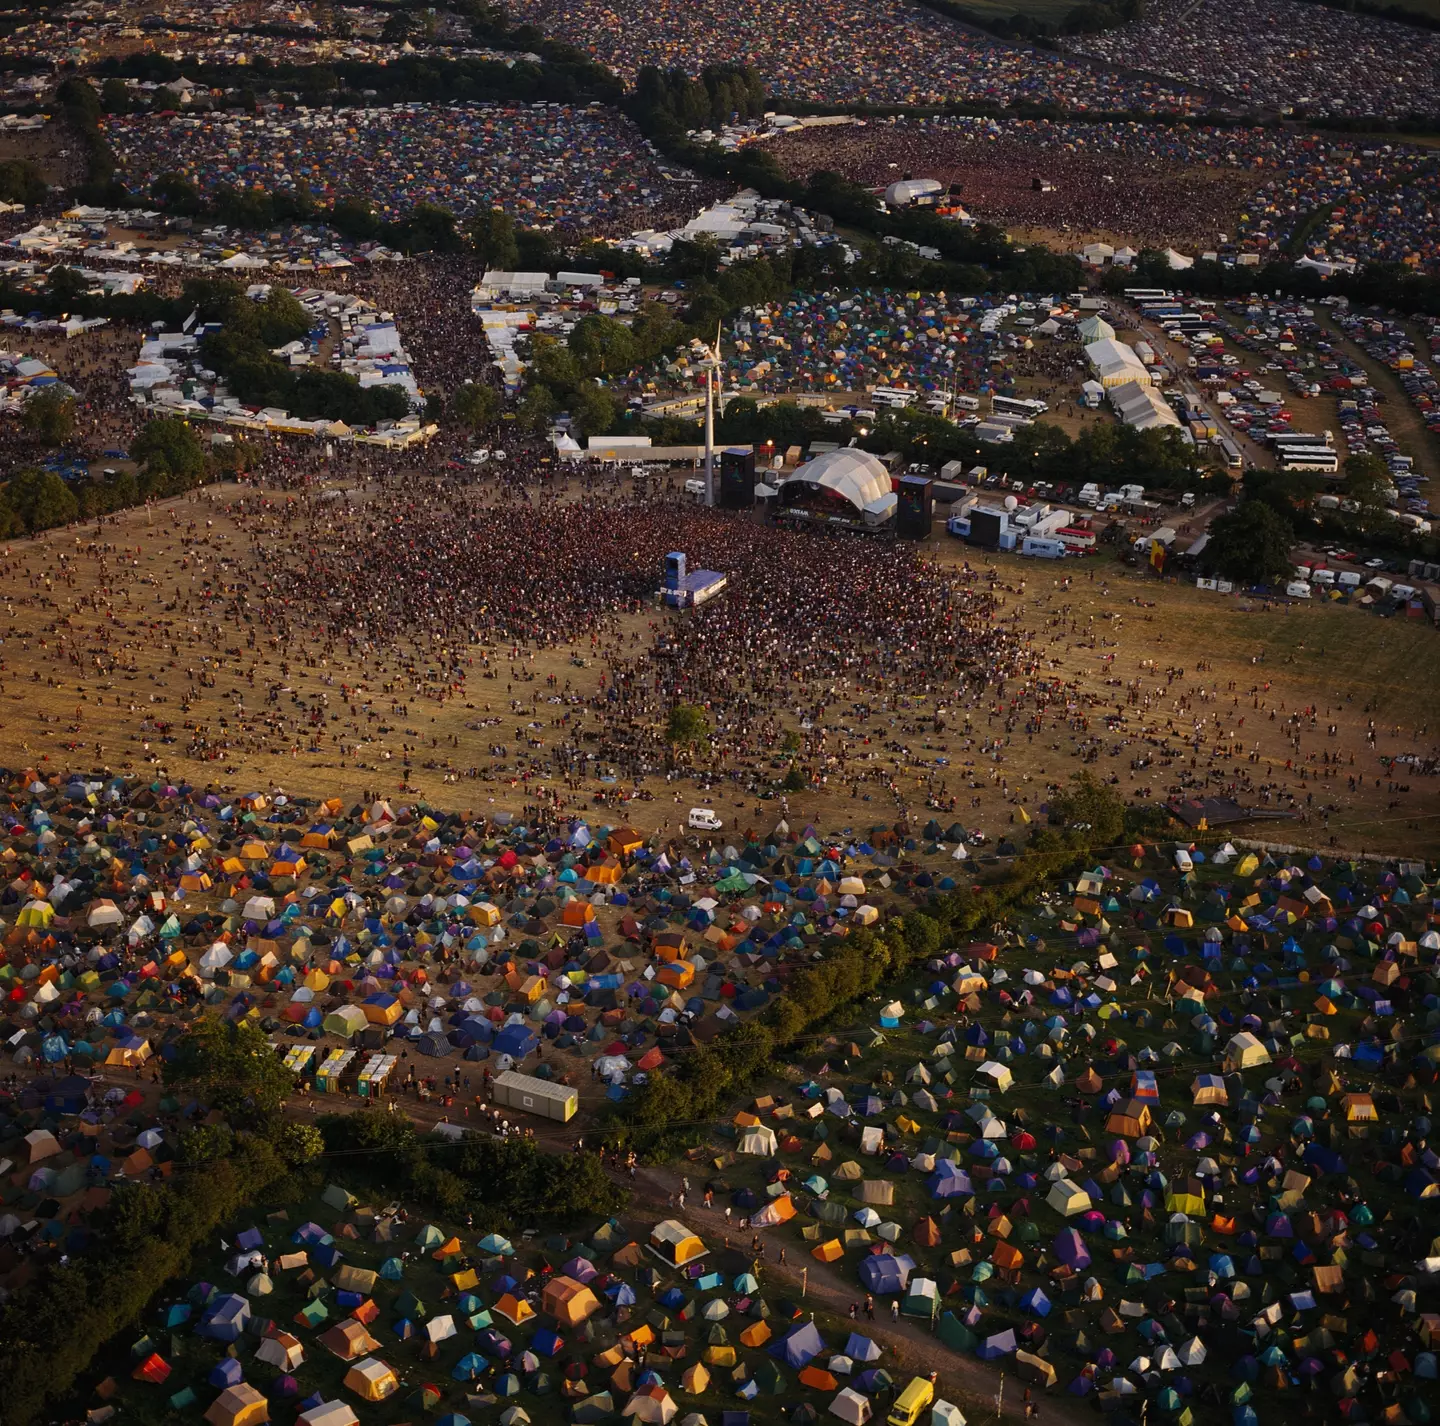 Glastonbury Festival is up and running this week.